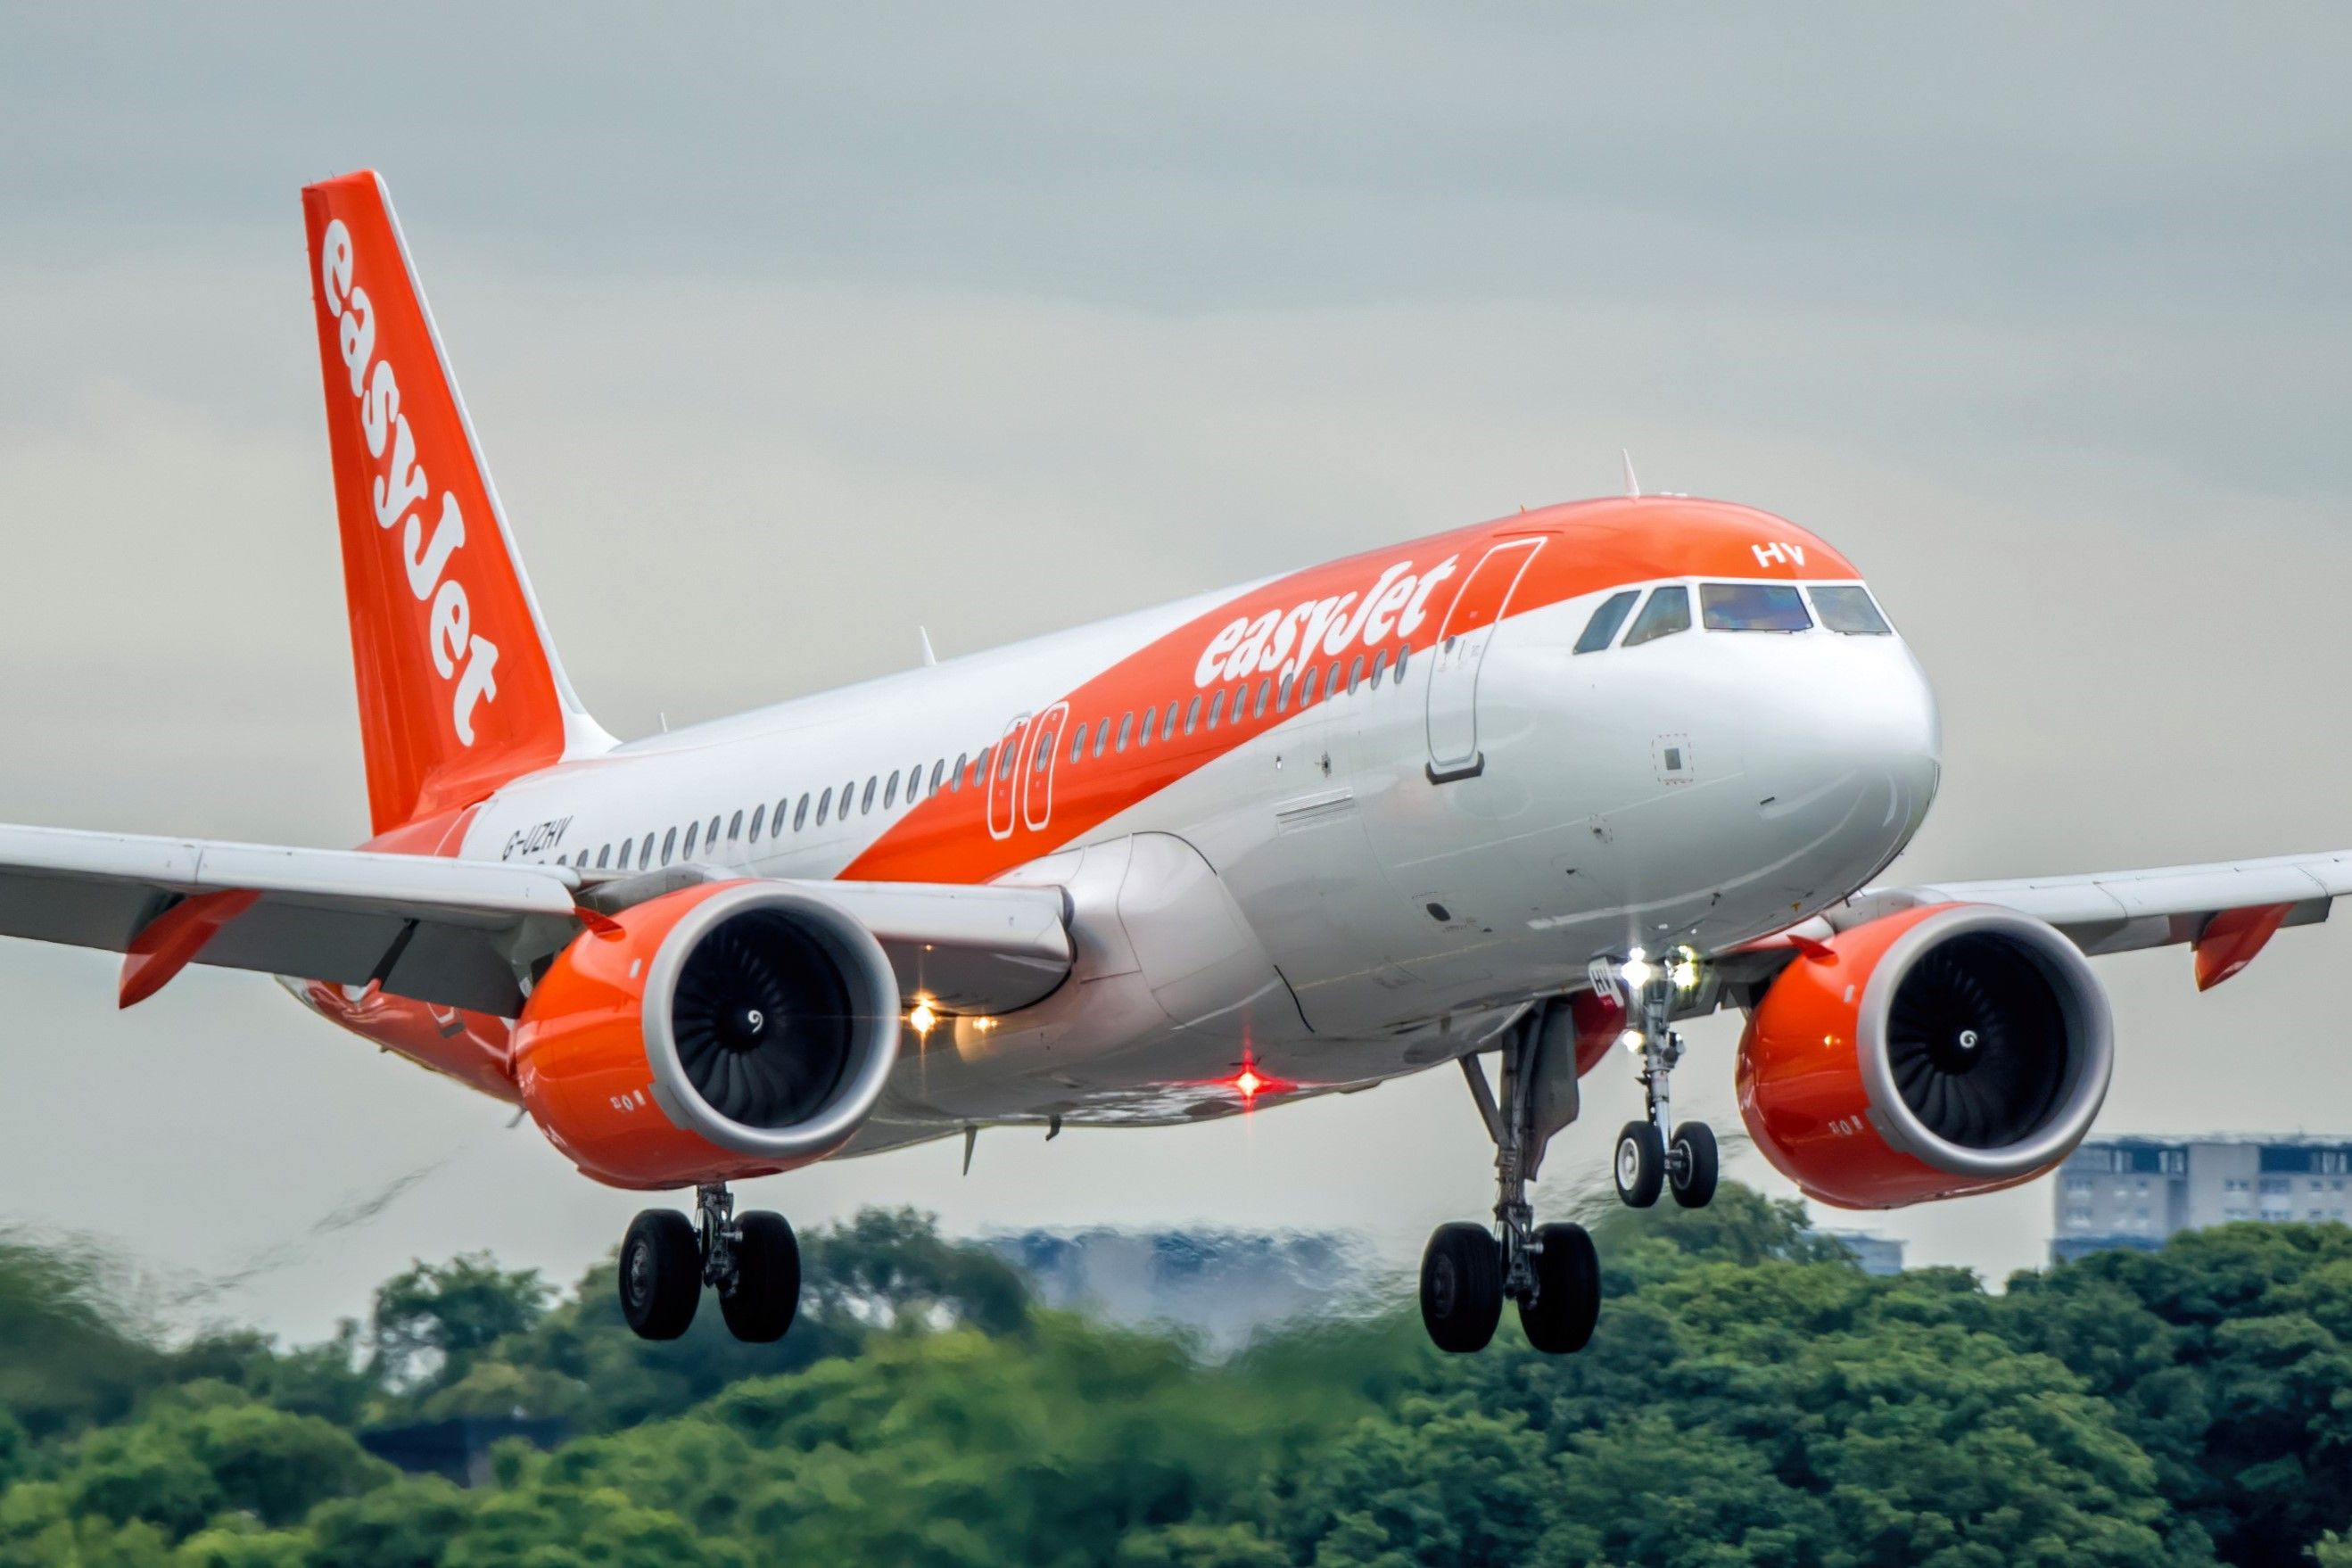 AneasyJet Airbus A320neo about to land